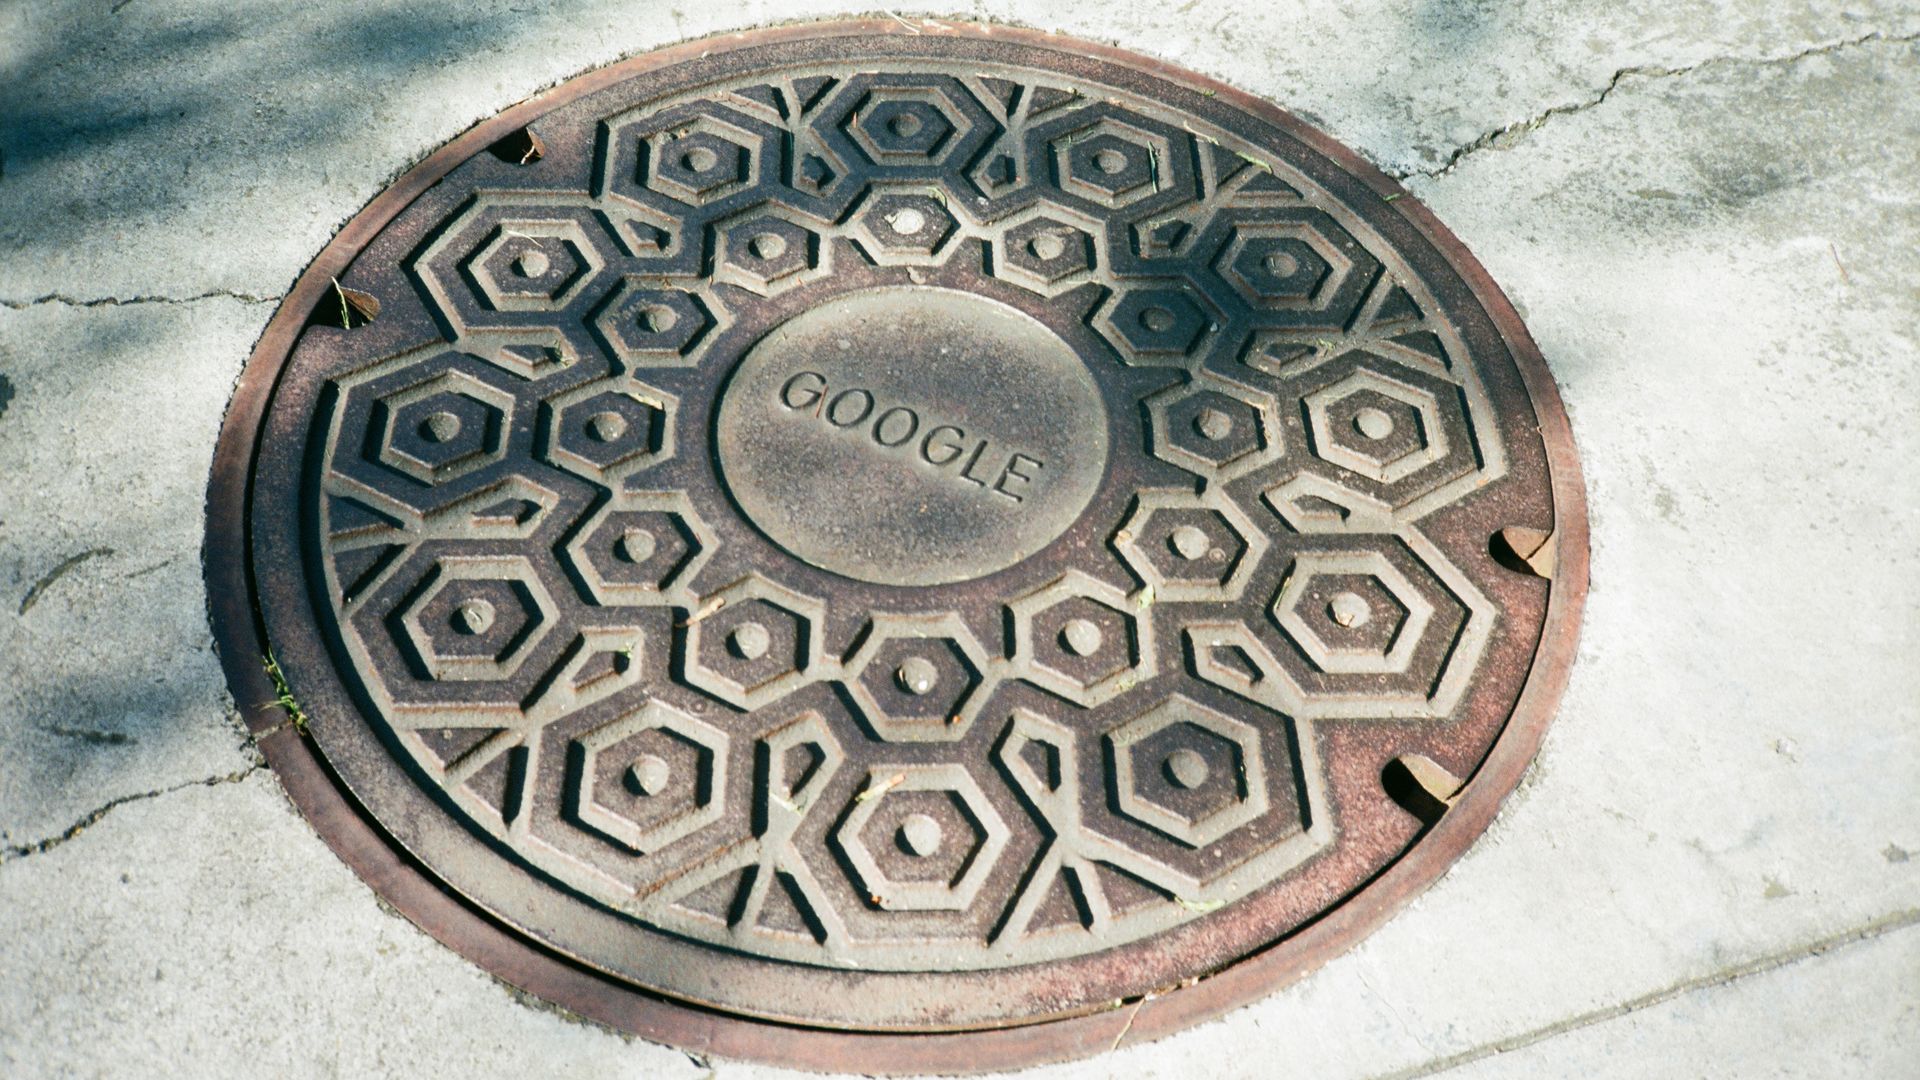 Photo of a manhole cover that says "Google" at its center